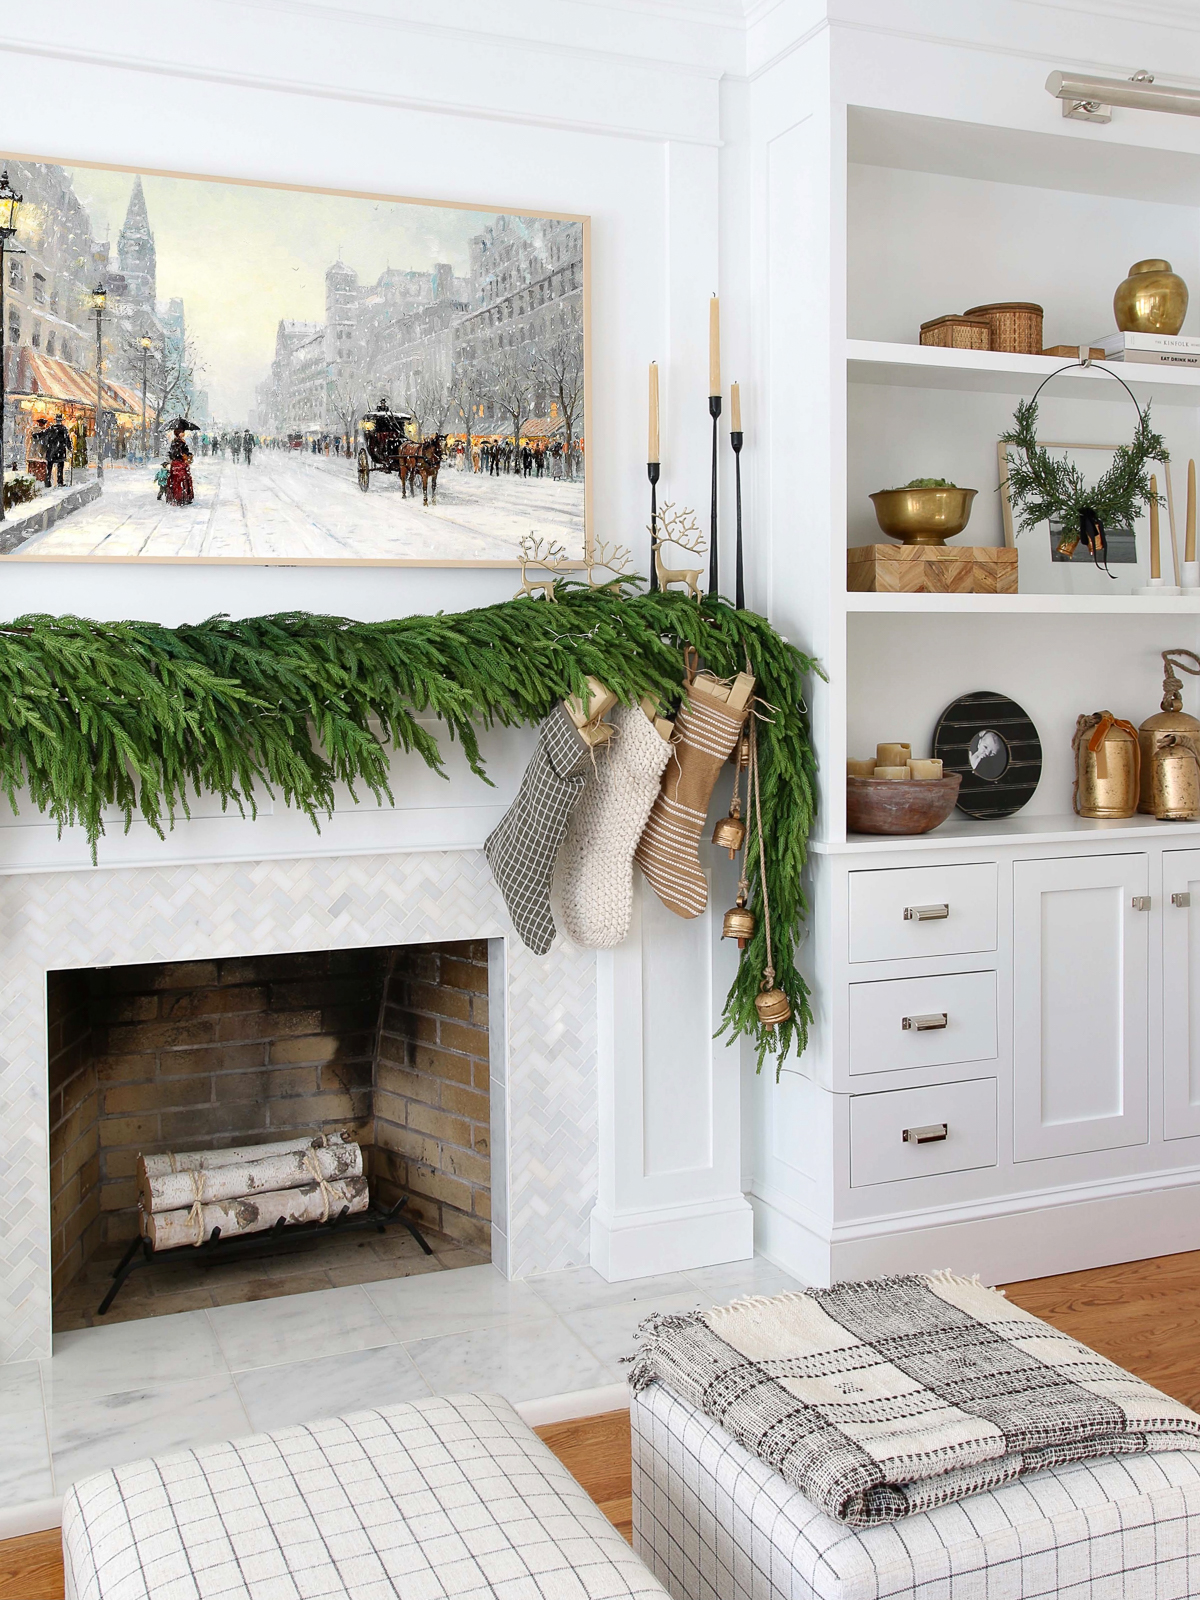 Fireplace mantel decorated with garland and stockings, frame tv above